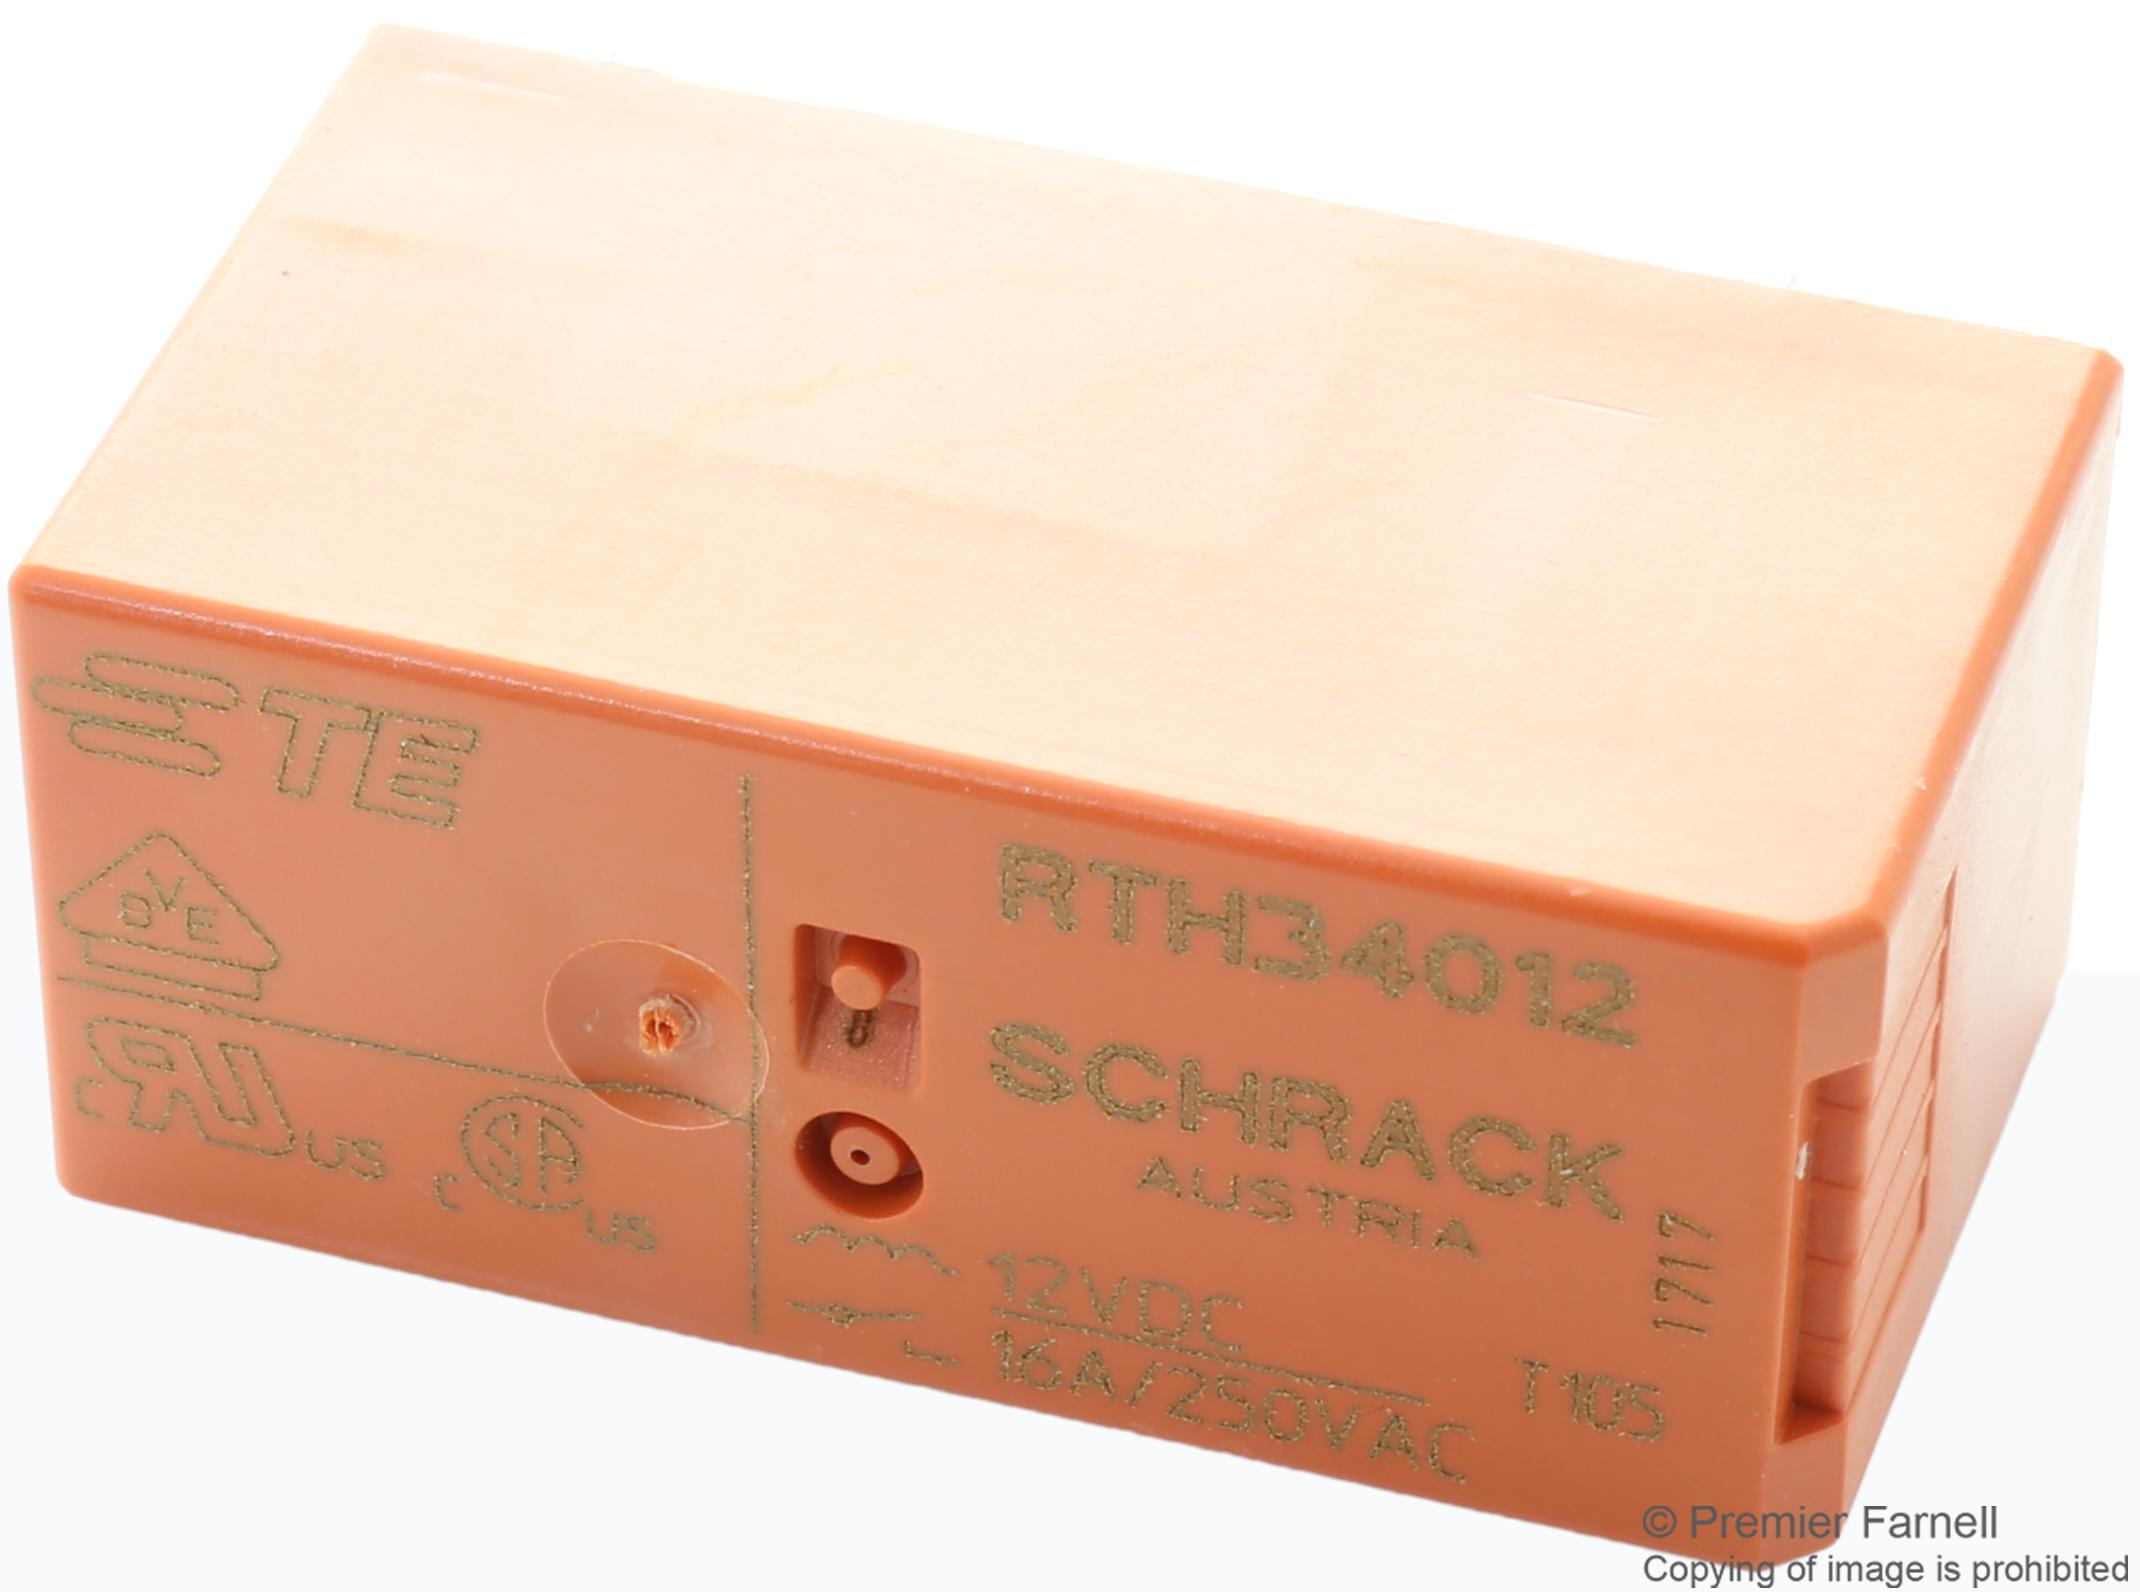 RTH34012 POWER RELAY, SPST-NO, 16A, 250VAC, TH SCHRACK - TE CONNECTIVITY